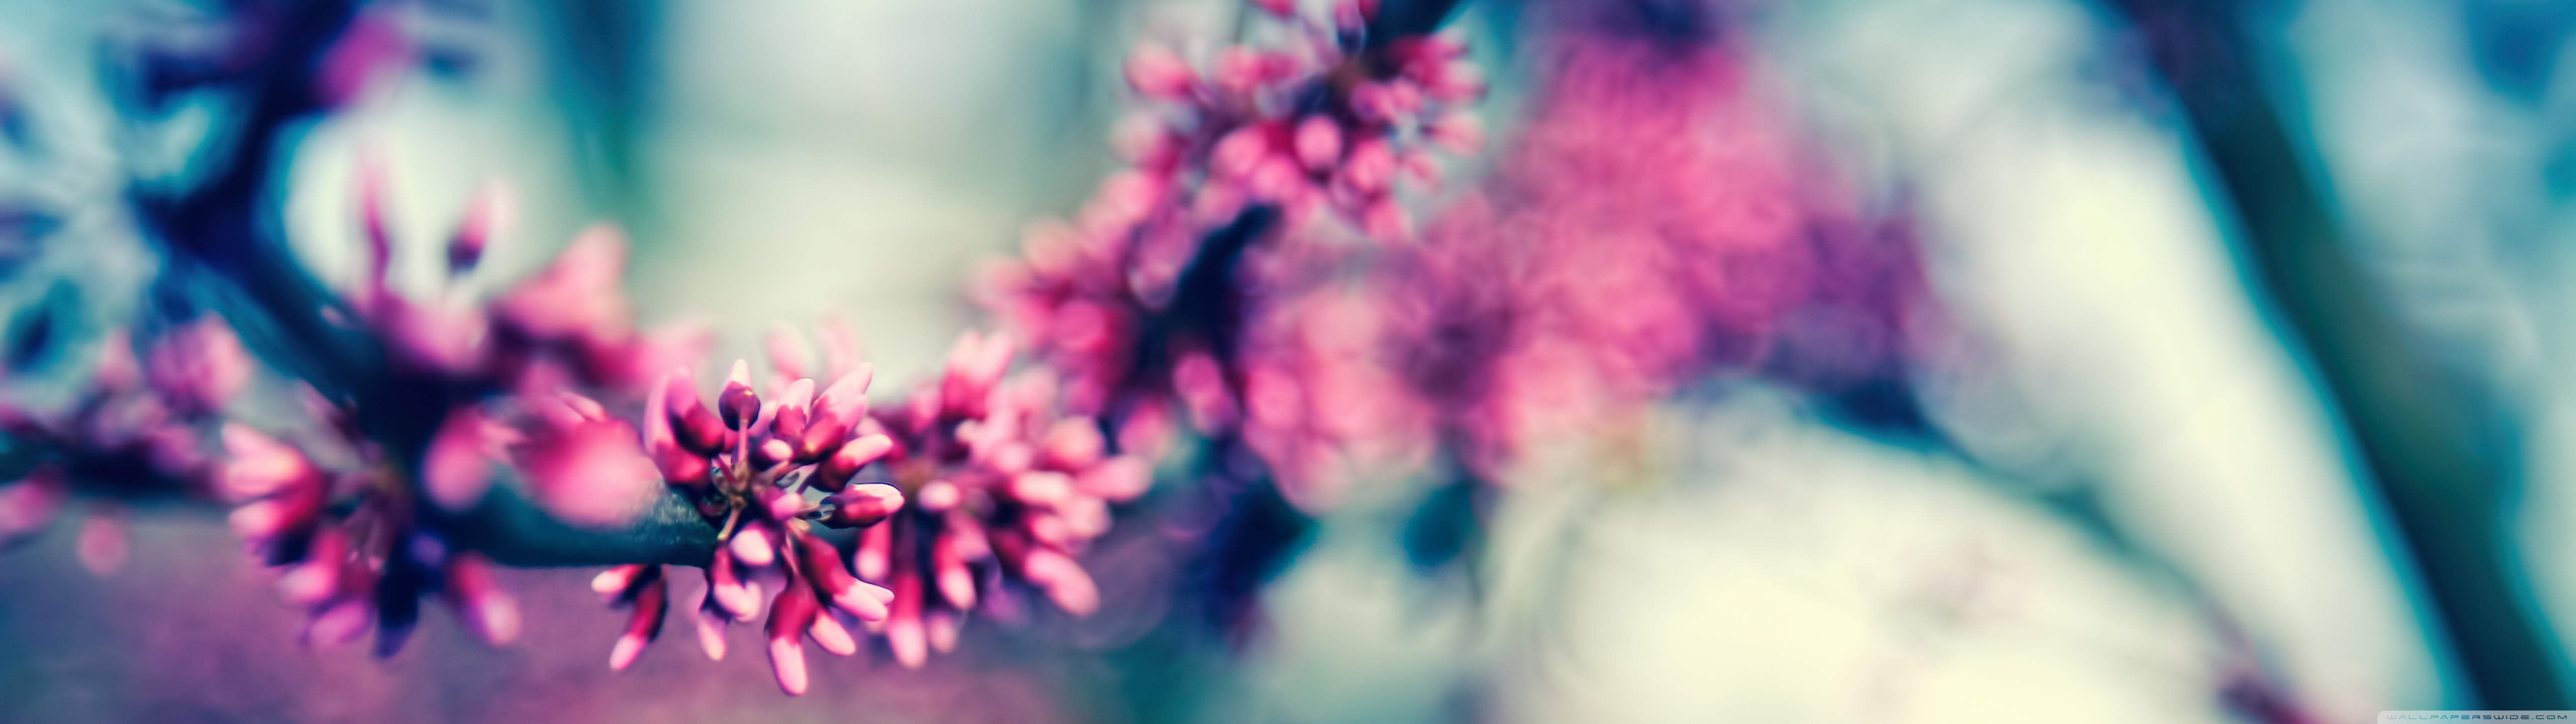 Beautiful Spring Colours Ultra HD Desktop Background Wallpaper for: Multi Display, Dual Monitor, Tablet